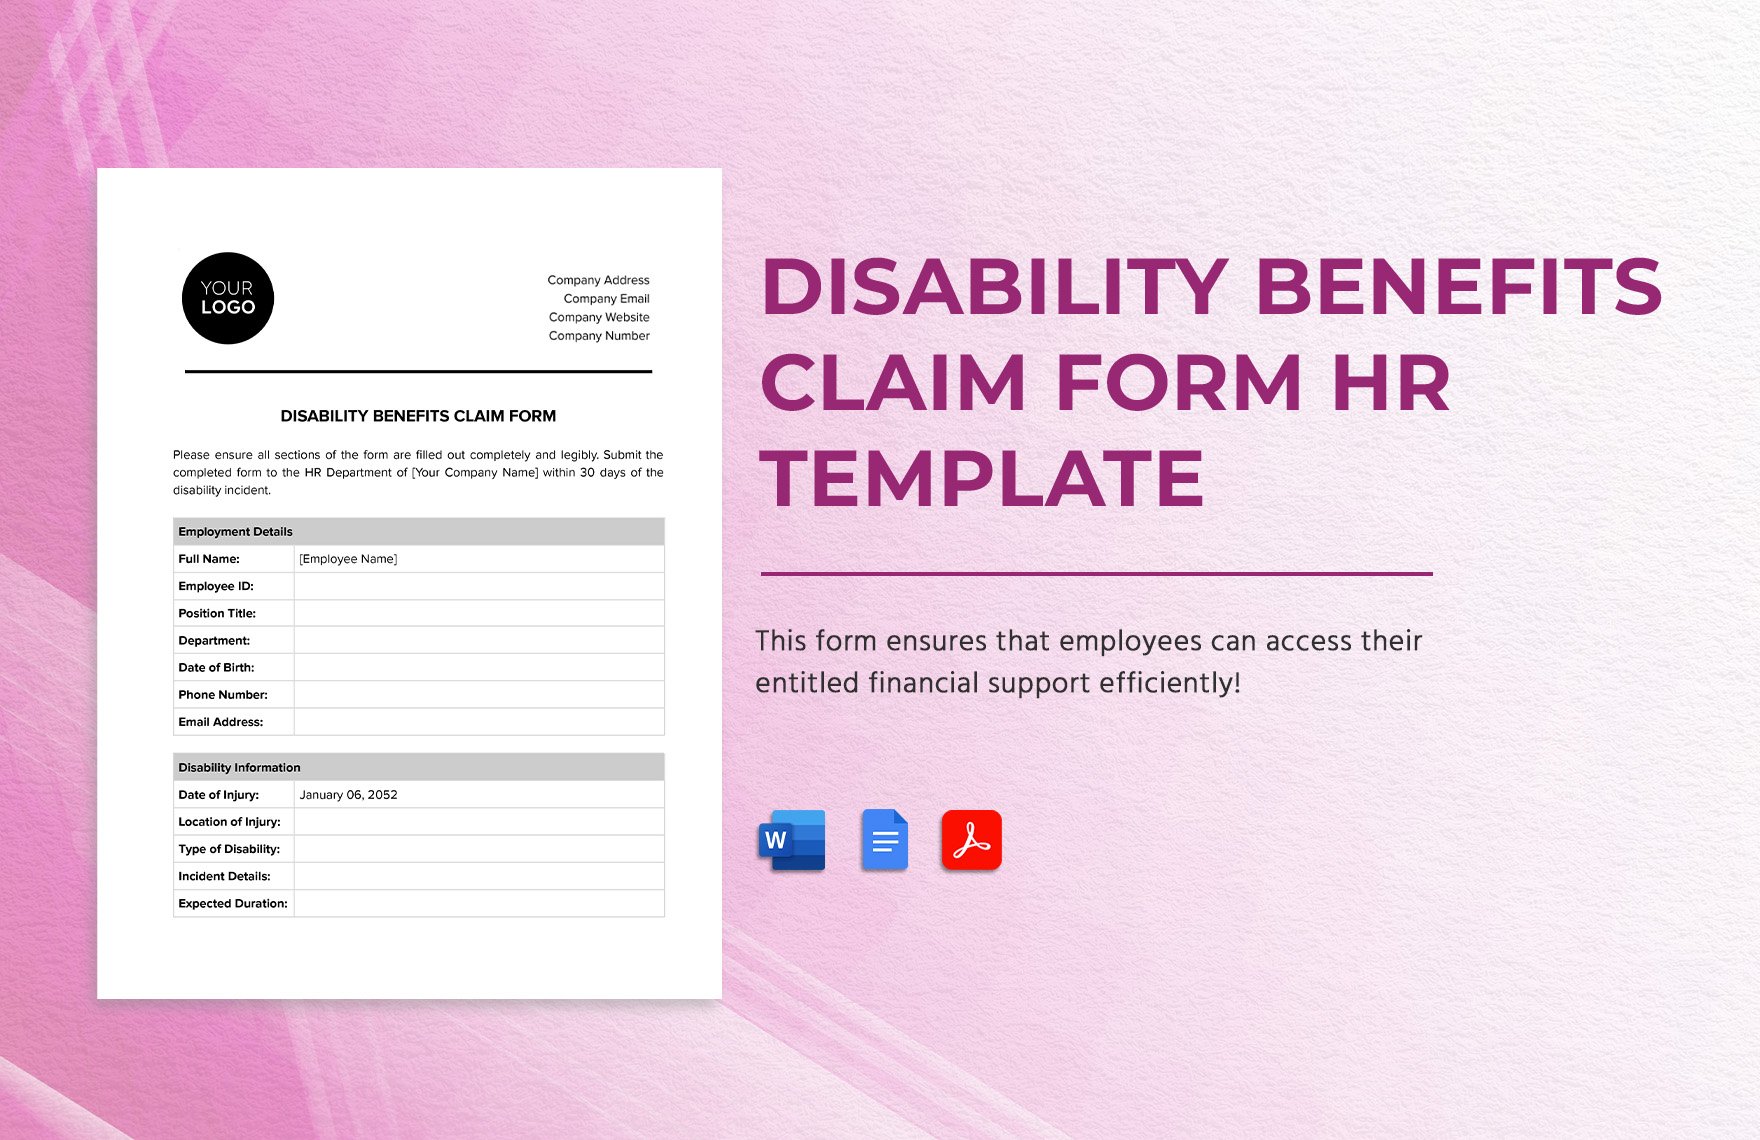 Disability Benefits Claim Form HR Template in Word, Google Docs, PDF